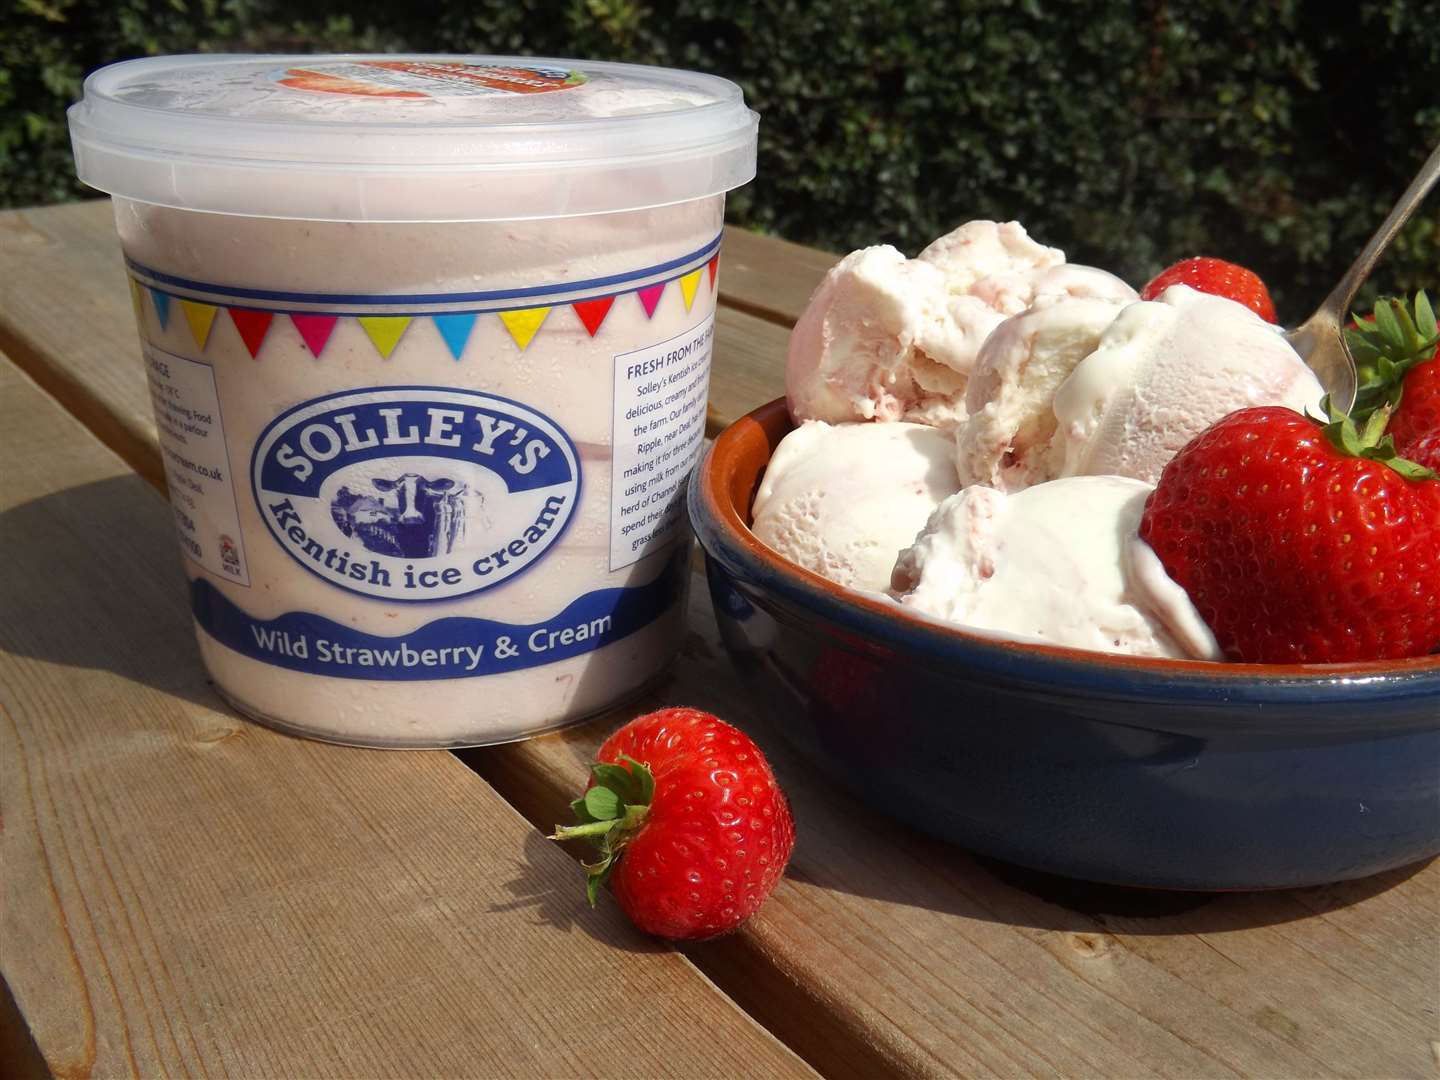 Tuck into ice cream at Solley's